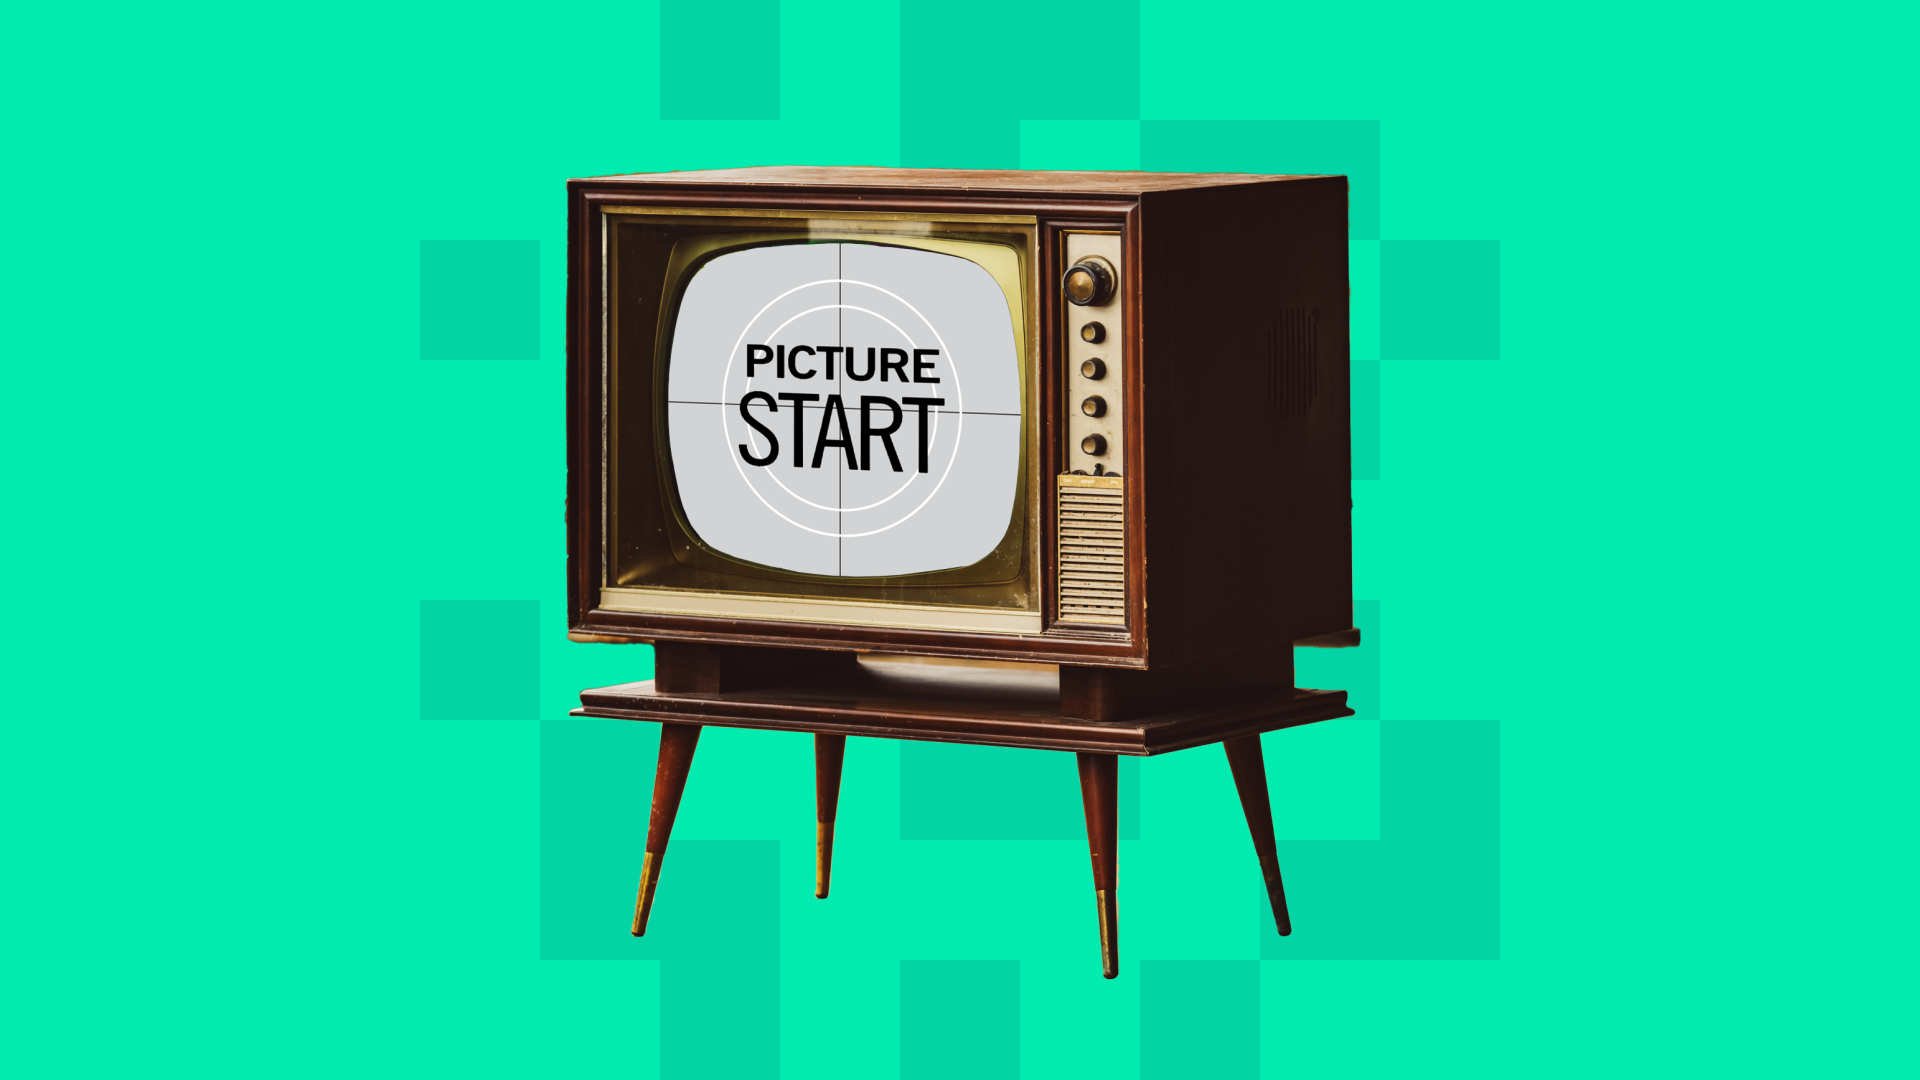 A Brief History of TV Advertising